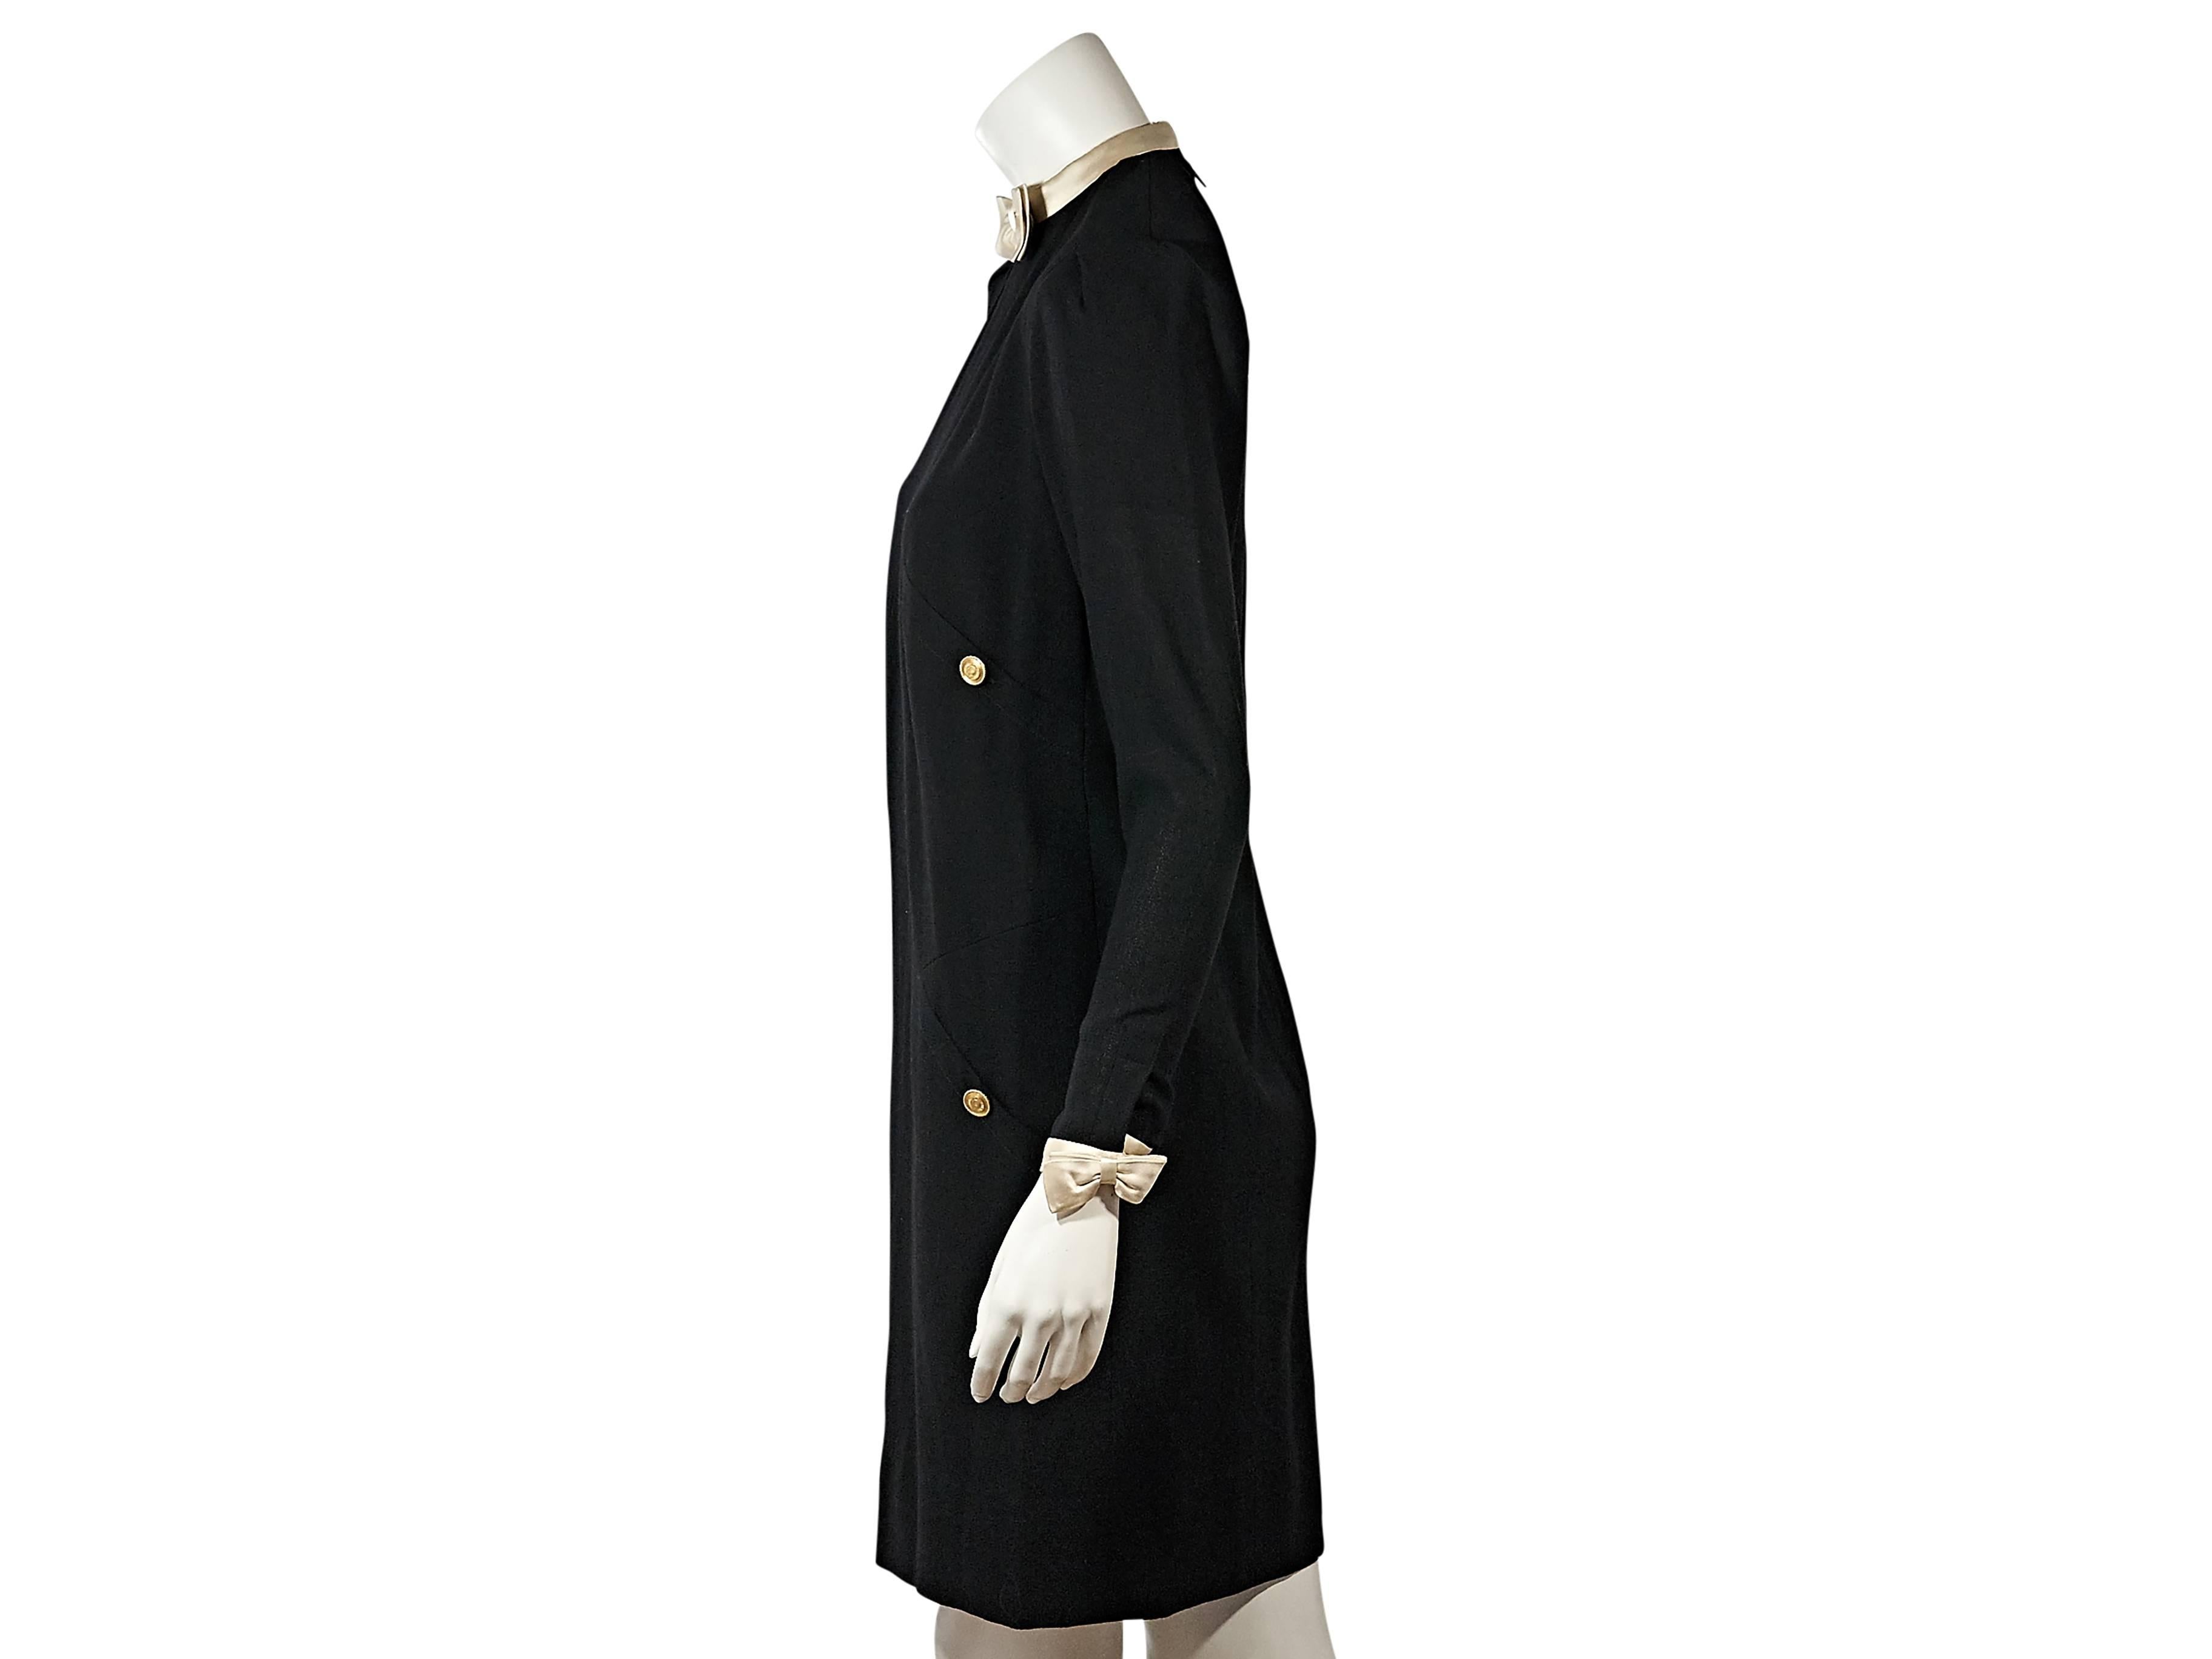 Product details:  Vintage black dress by Chanel.  Crewneck accented with a bow.  Long sleeves.  Satin-trimmed cuffs with bow accents.  Concealed back zip closure.  
Condition: Very good. 

